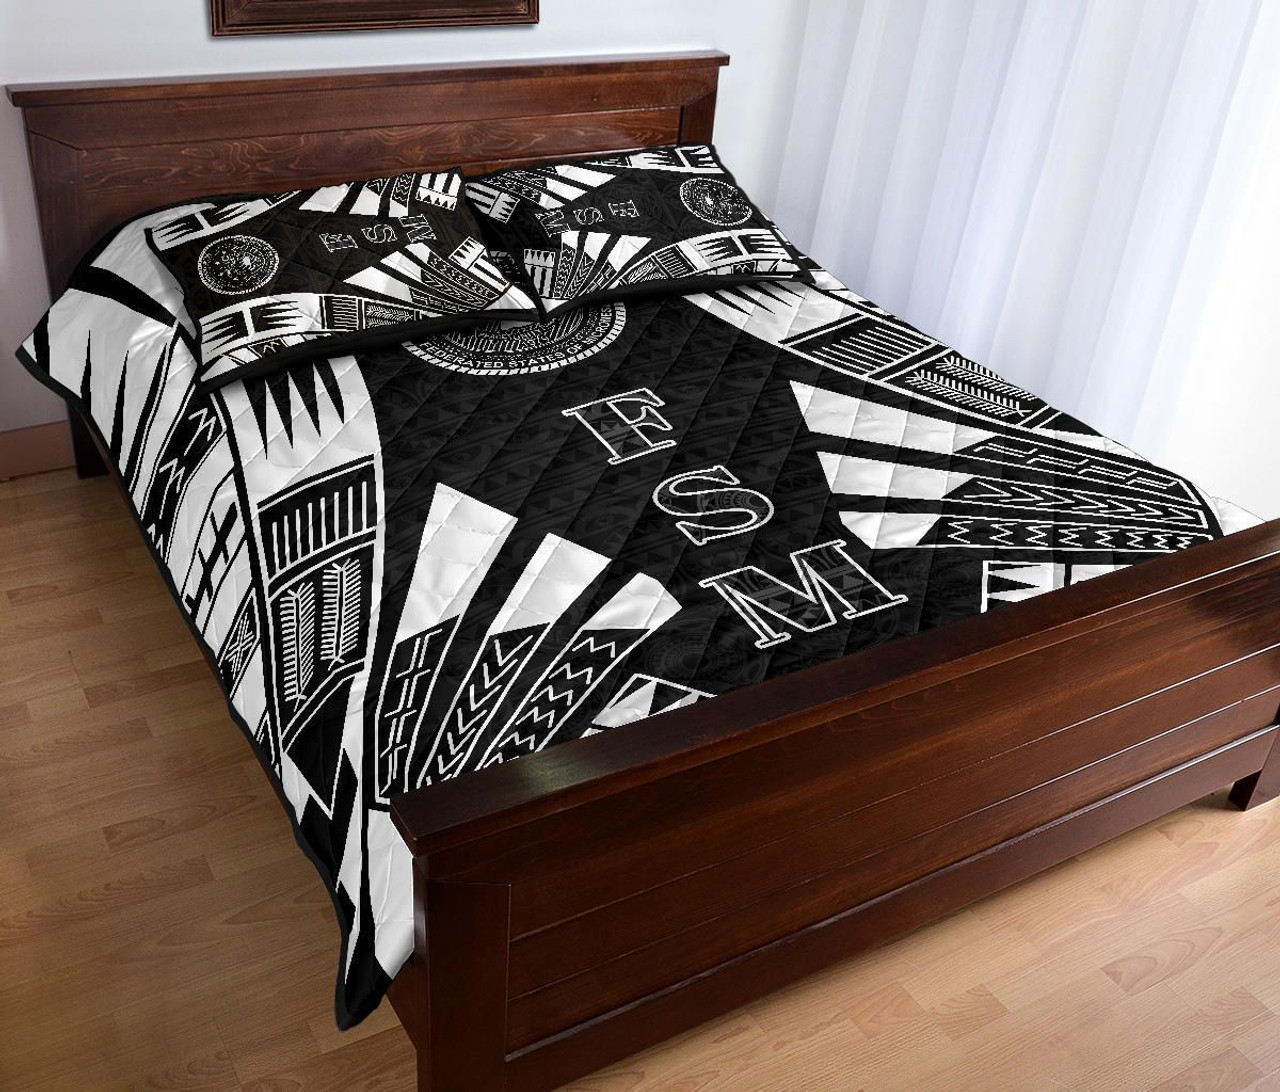 Federated States of Micronesia Quilt Bed Set - Federated States of Micronesia Seal Polynesian White Tattoo Style 4